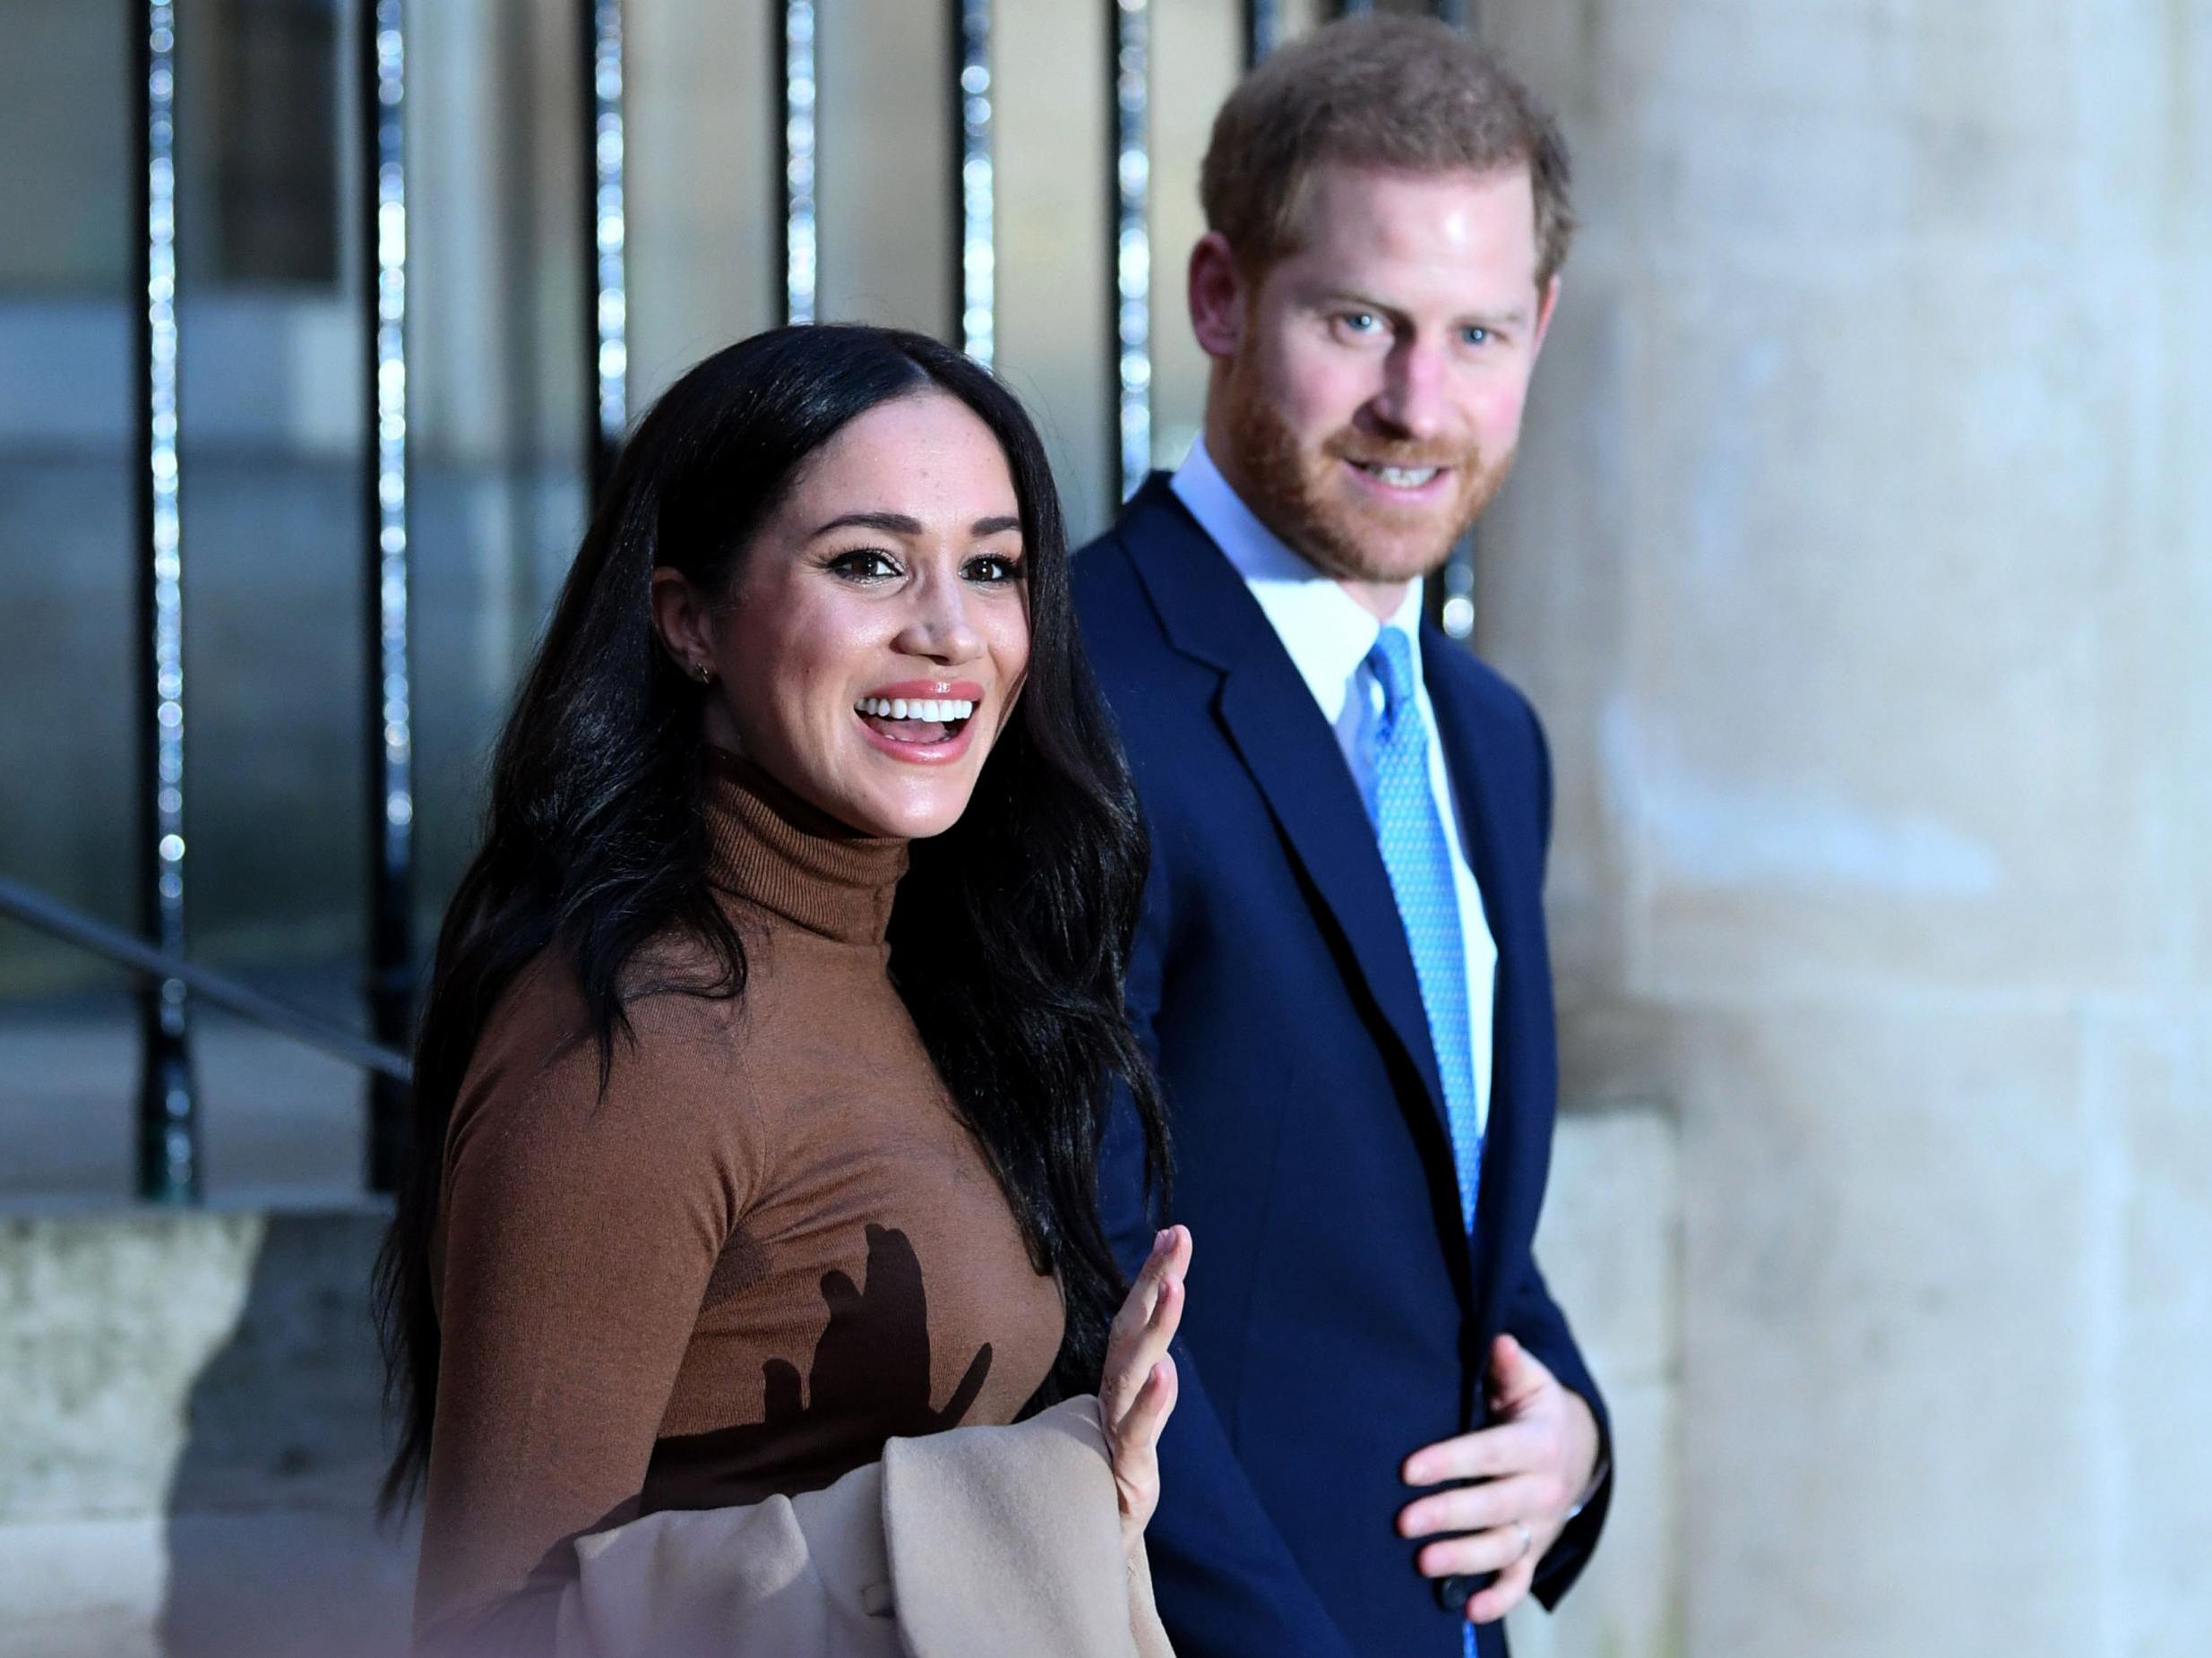 Related video: Duke of Sussex ‘incredibly proud’ of British response to Covid-19